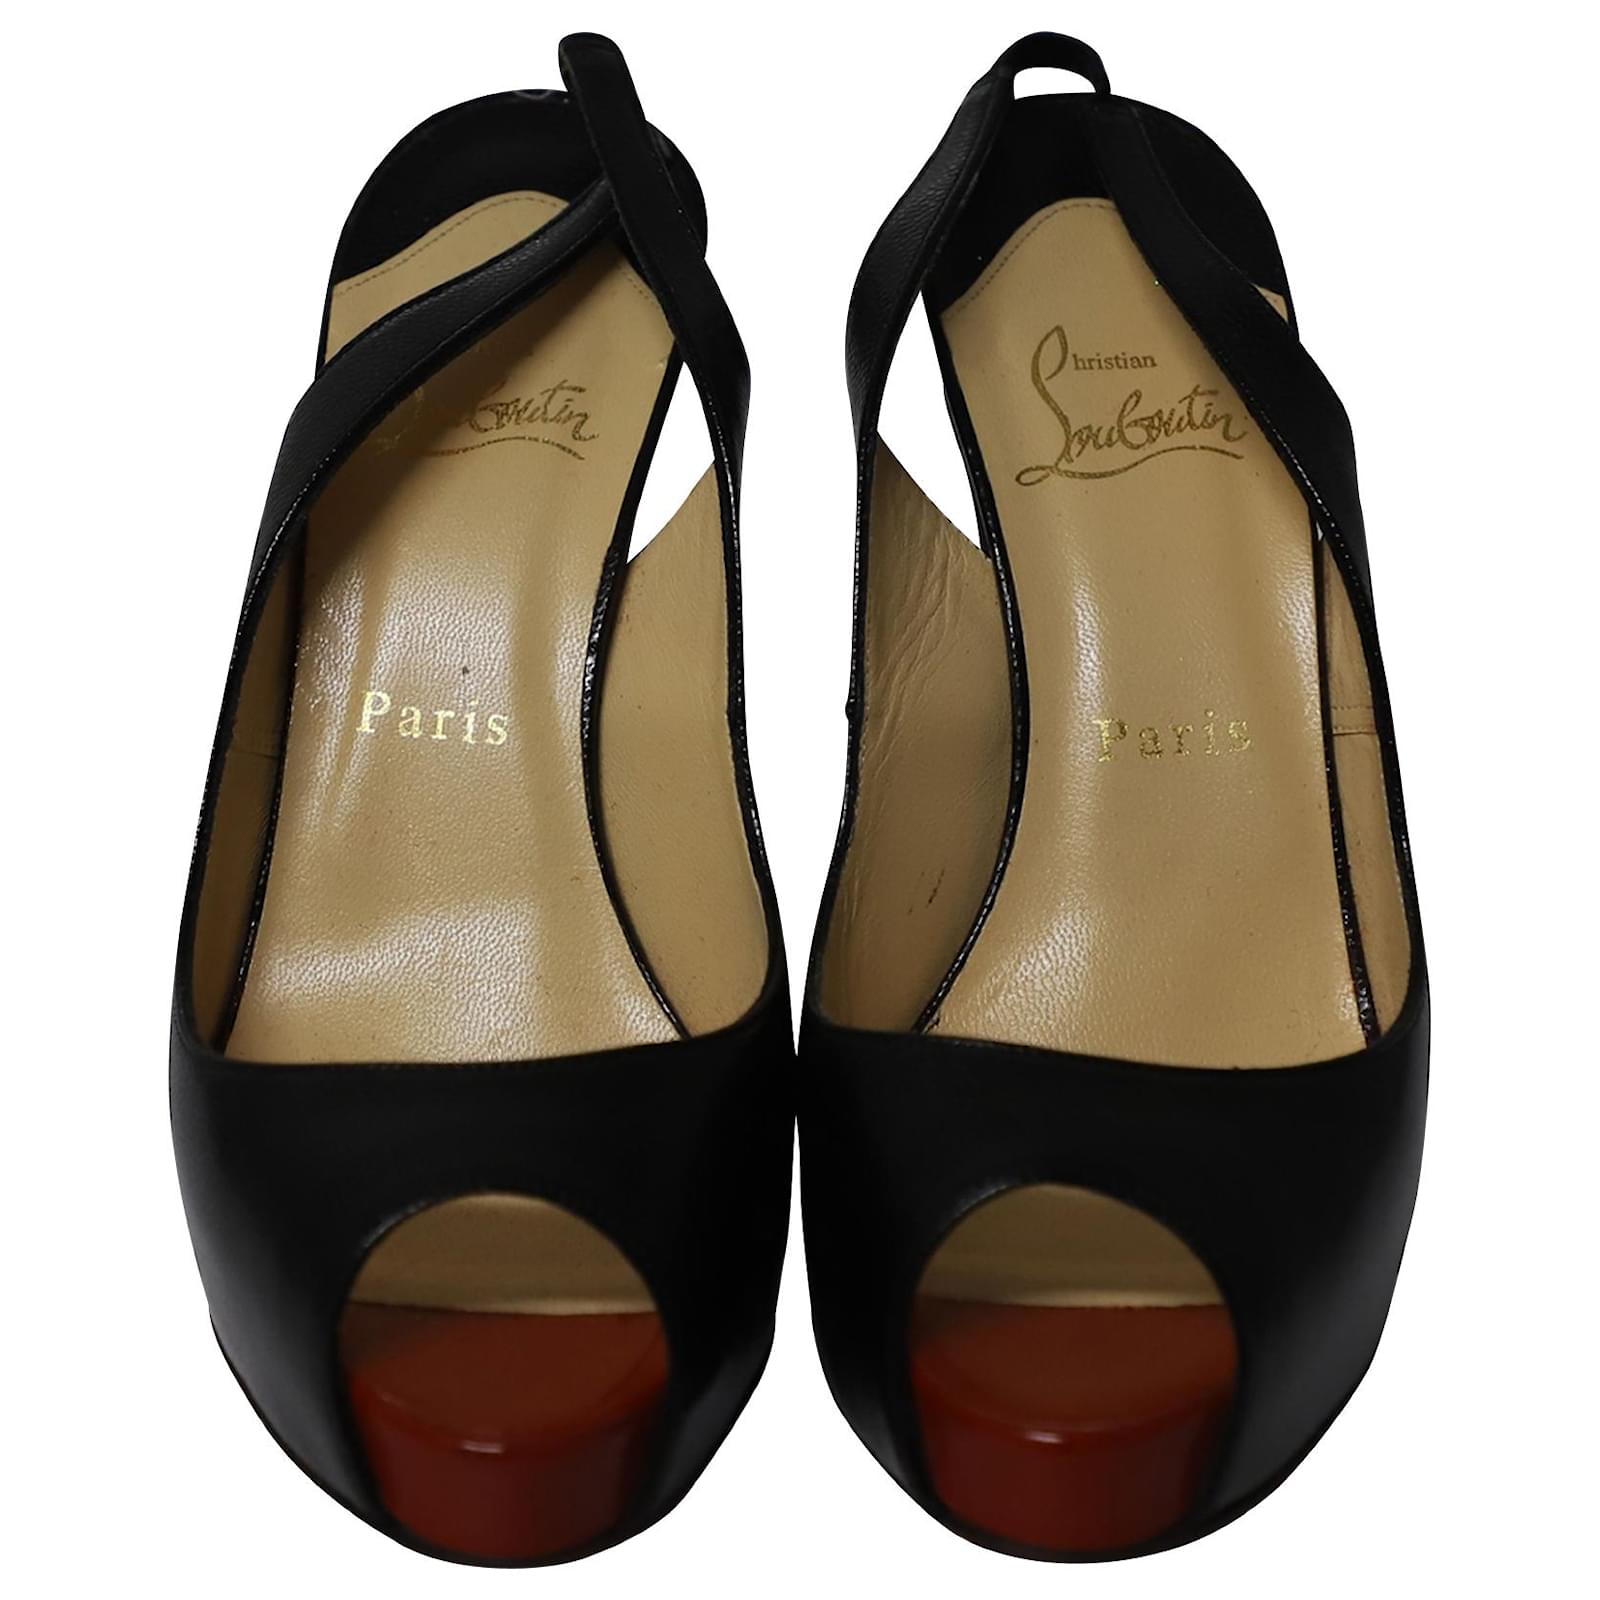 Christian Louboutin New Prive 120 Slingback Sandals in Black Leather ...